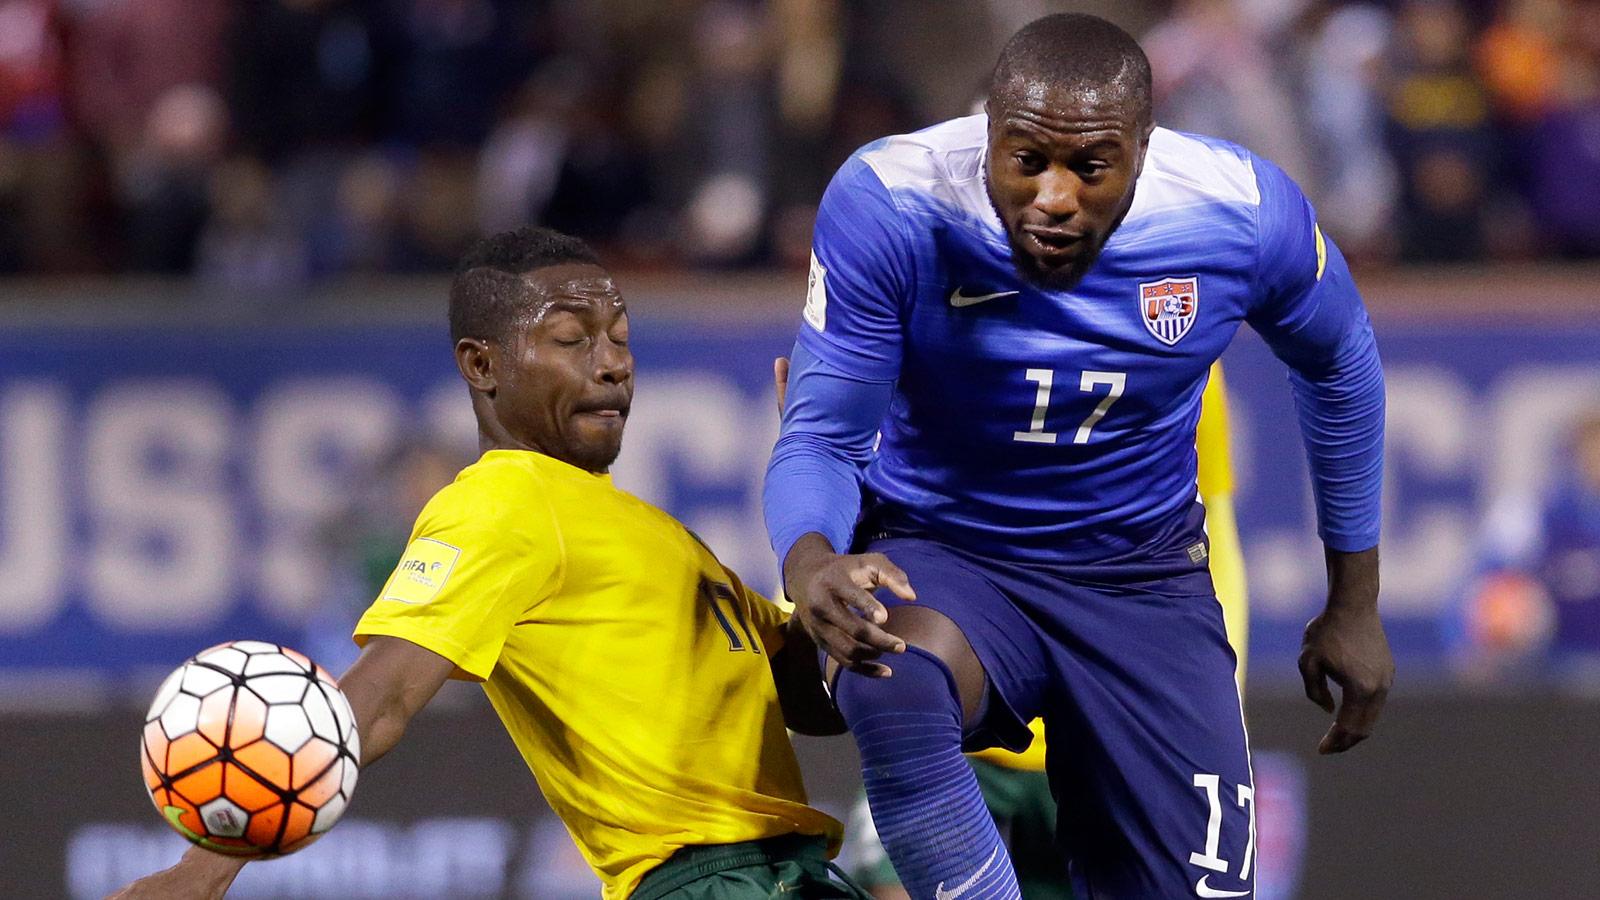 Altidore scores twice as U.S. rolls to 6-1 victory over St. Vincent